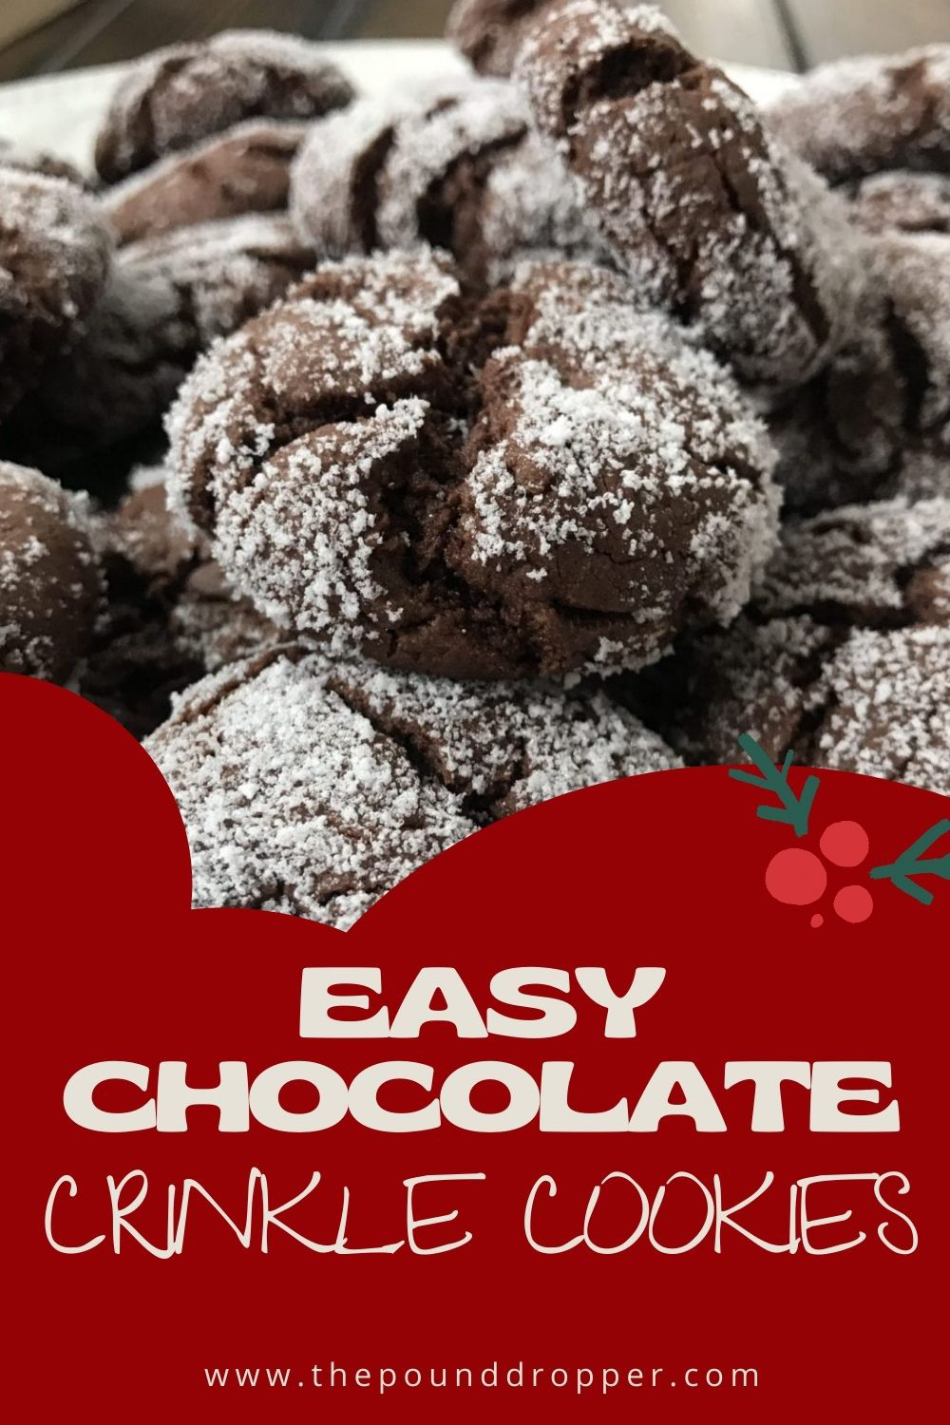 These Easy Chocolate Crinkle Cookies are made using a box of cake mix, egg whites, oil, and sugar. They make a perfect dessert or fantastic treat to bring to your next potluck! via @pounddropper